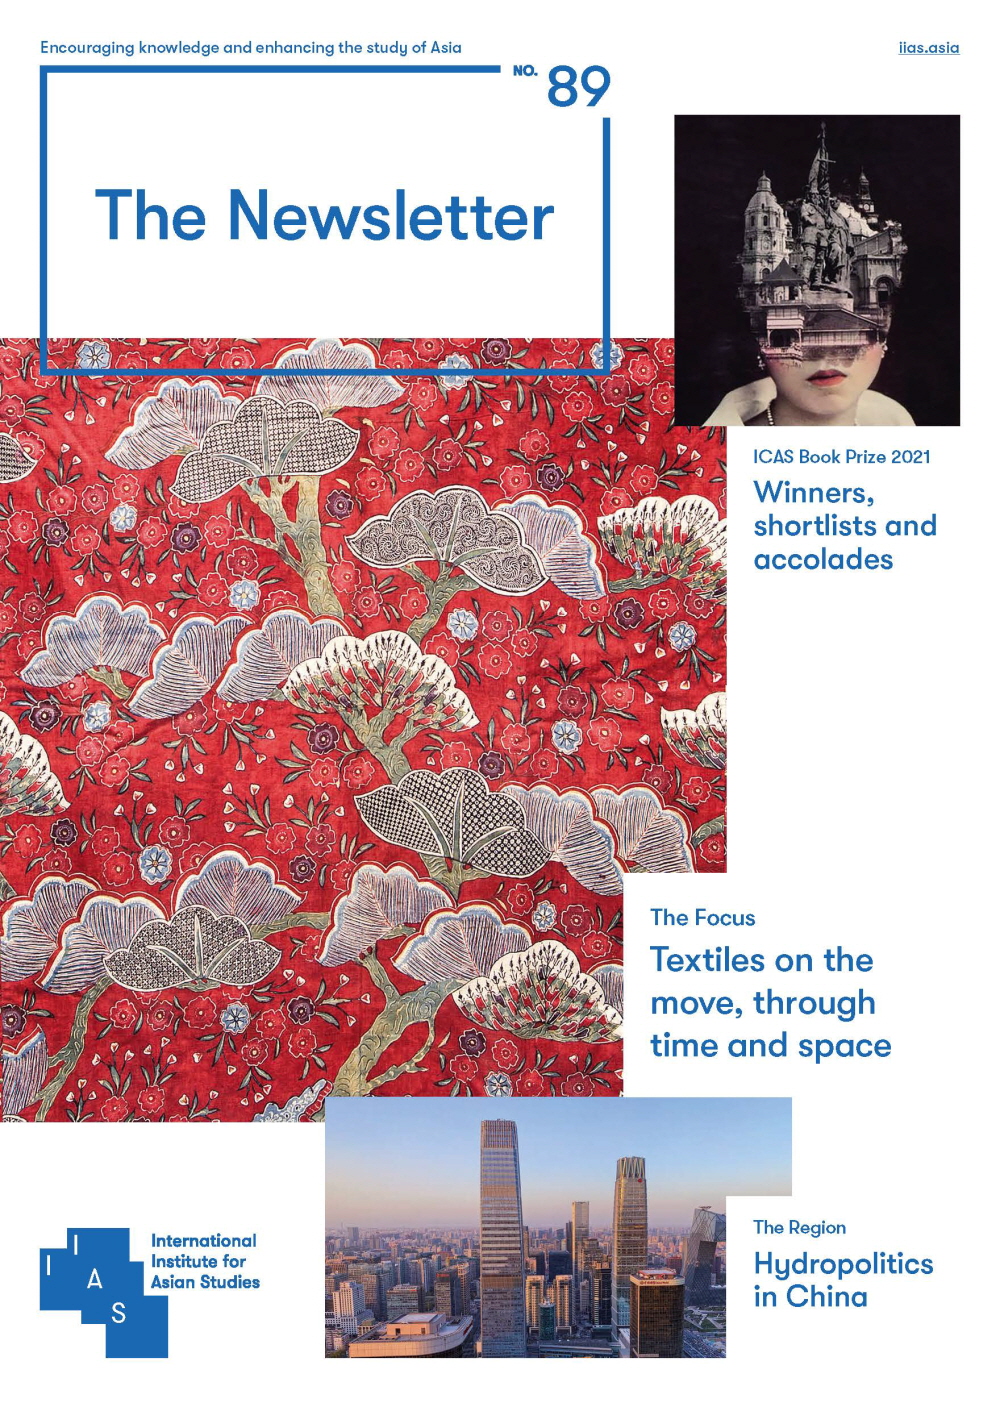 IIAS 〈The Newsletter〉 Vol. 89 – ICAS Book Prize 2021